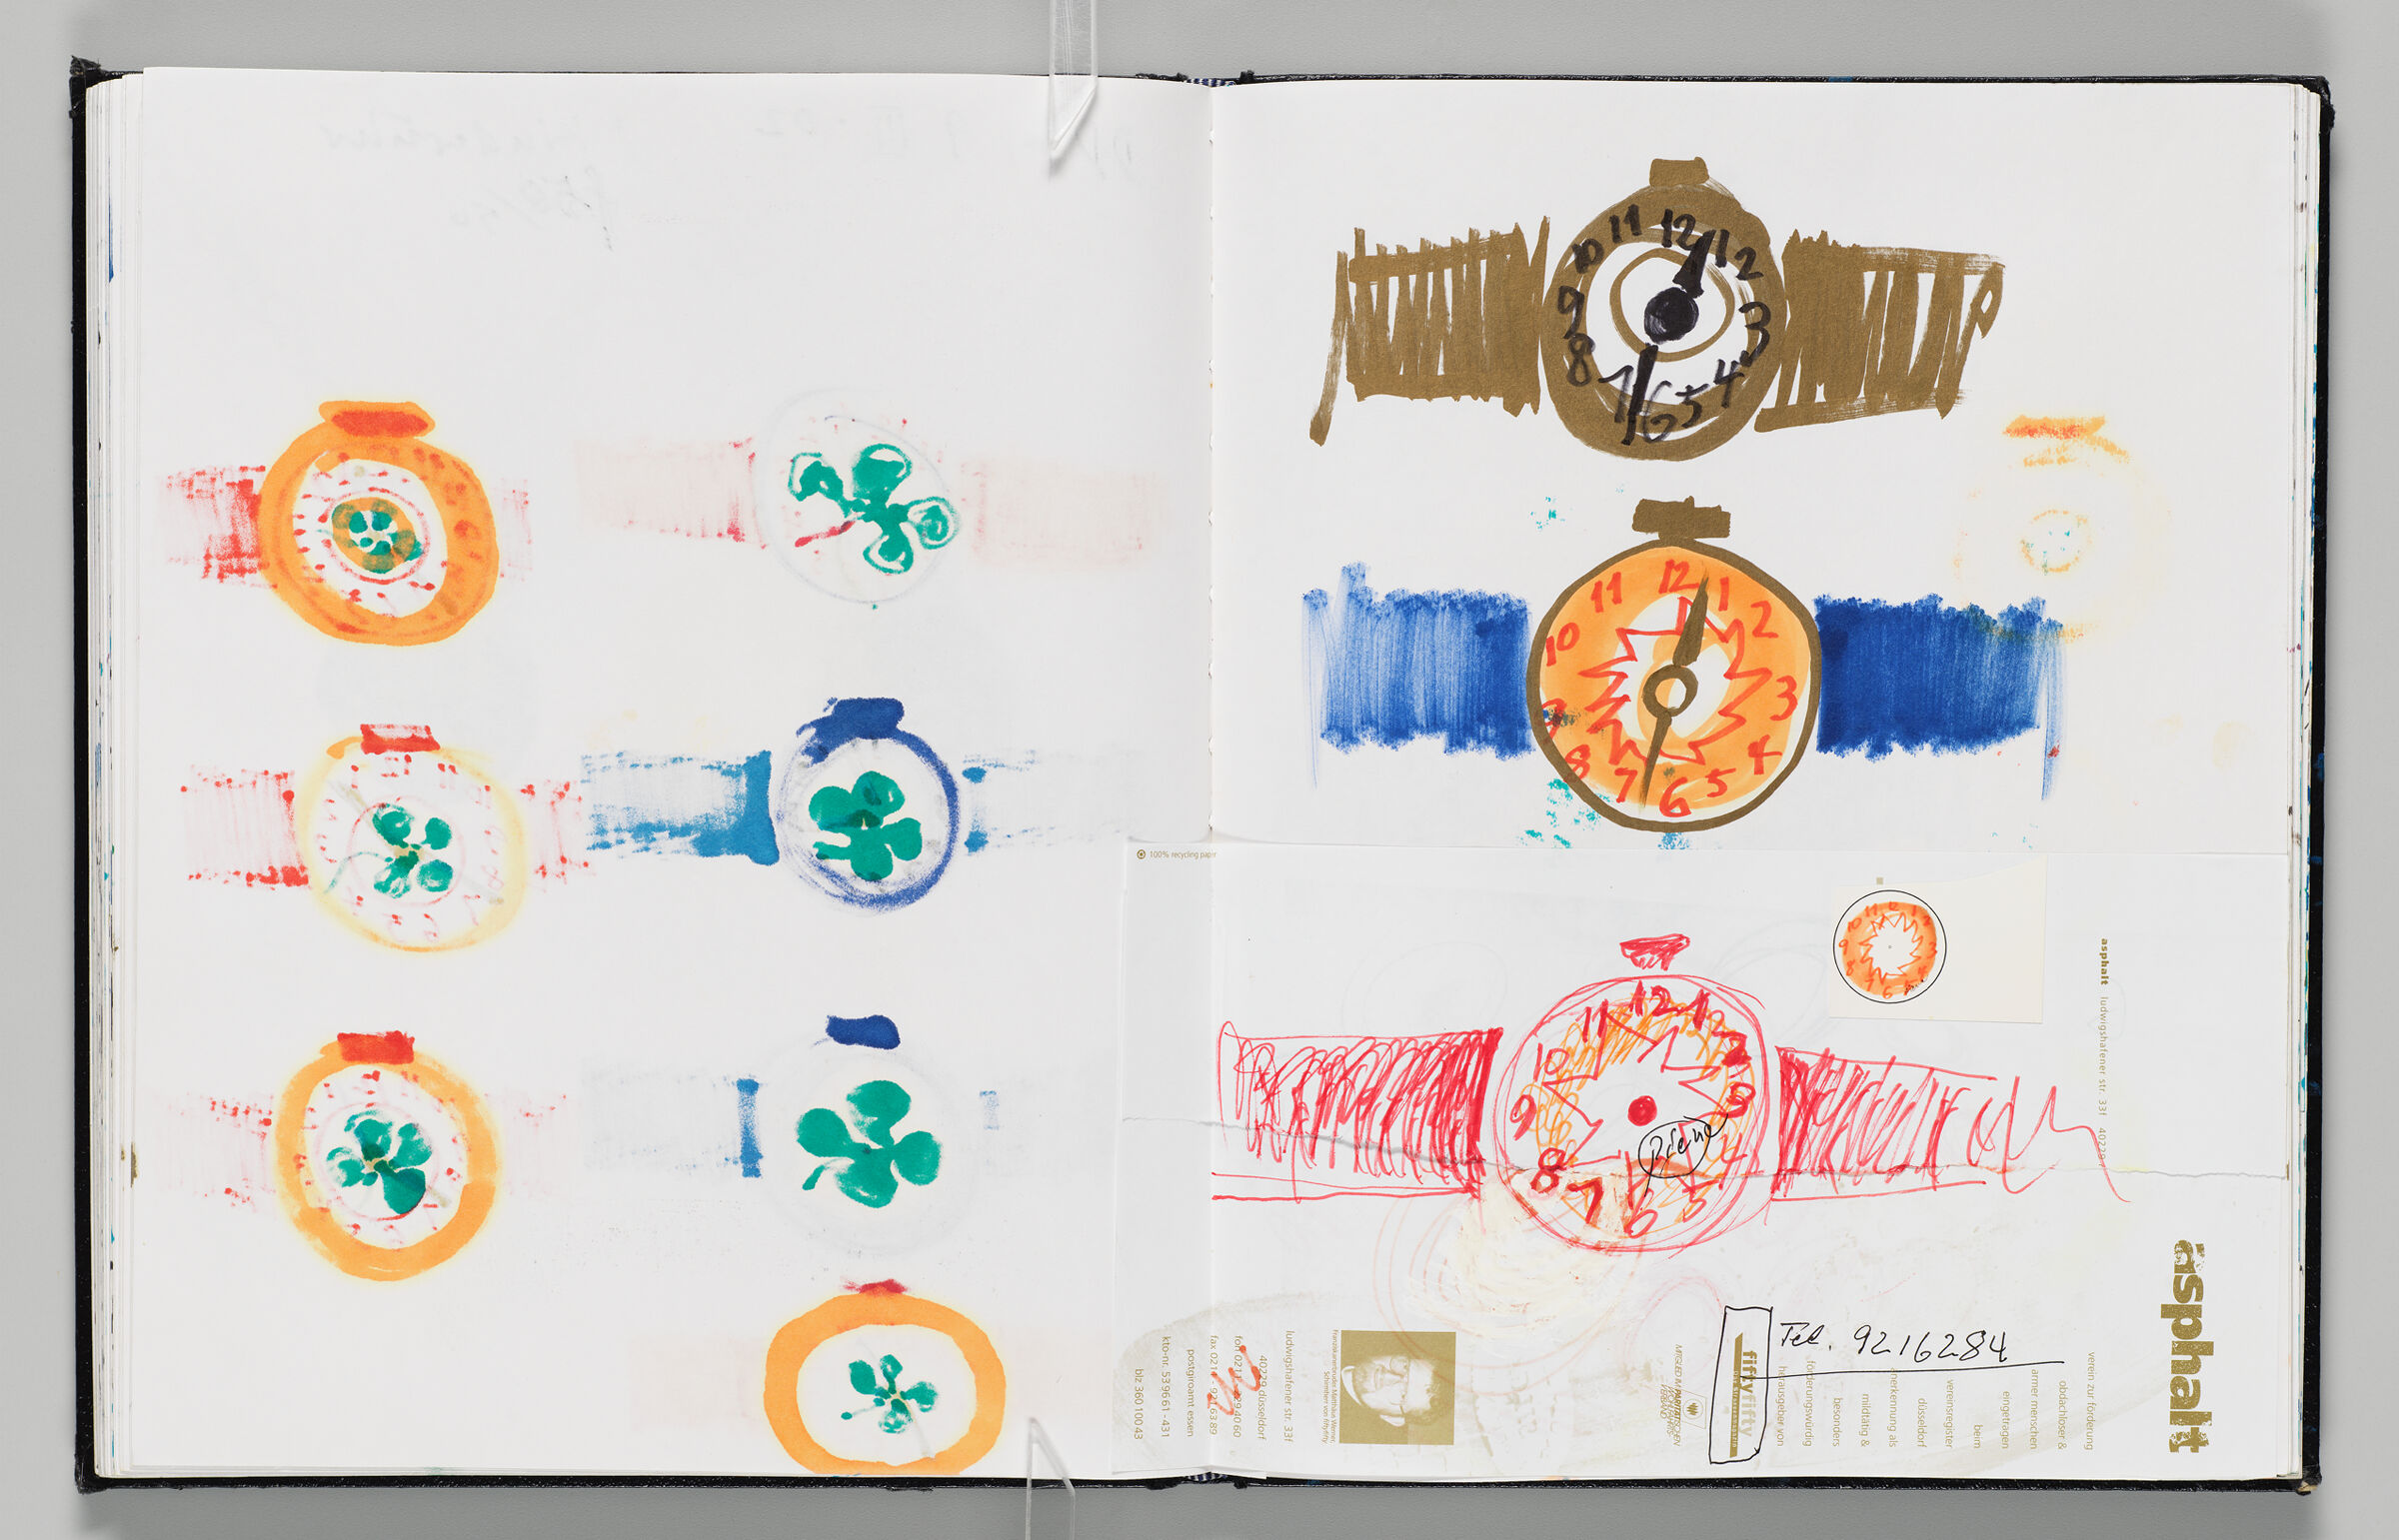 Untitled (Bleed-Through Of Previous Page, Left Page); Untitled (Children's Watch Designs And Pasted-In Sketches, Right Page)